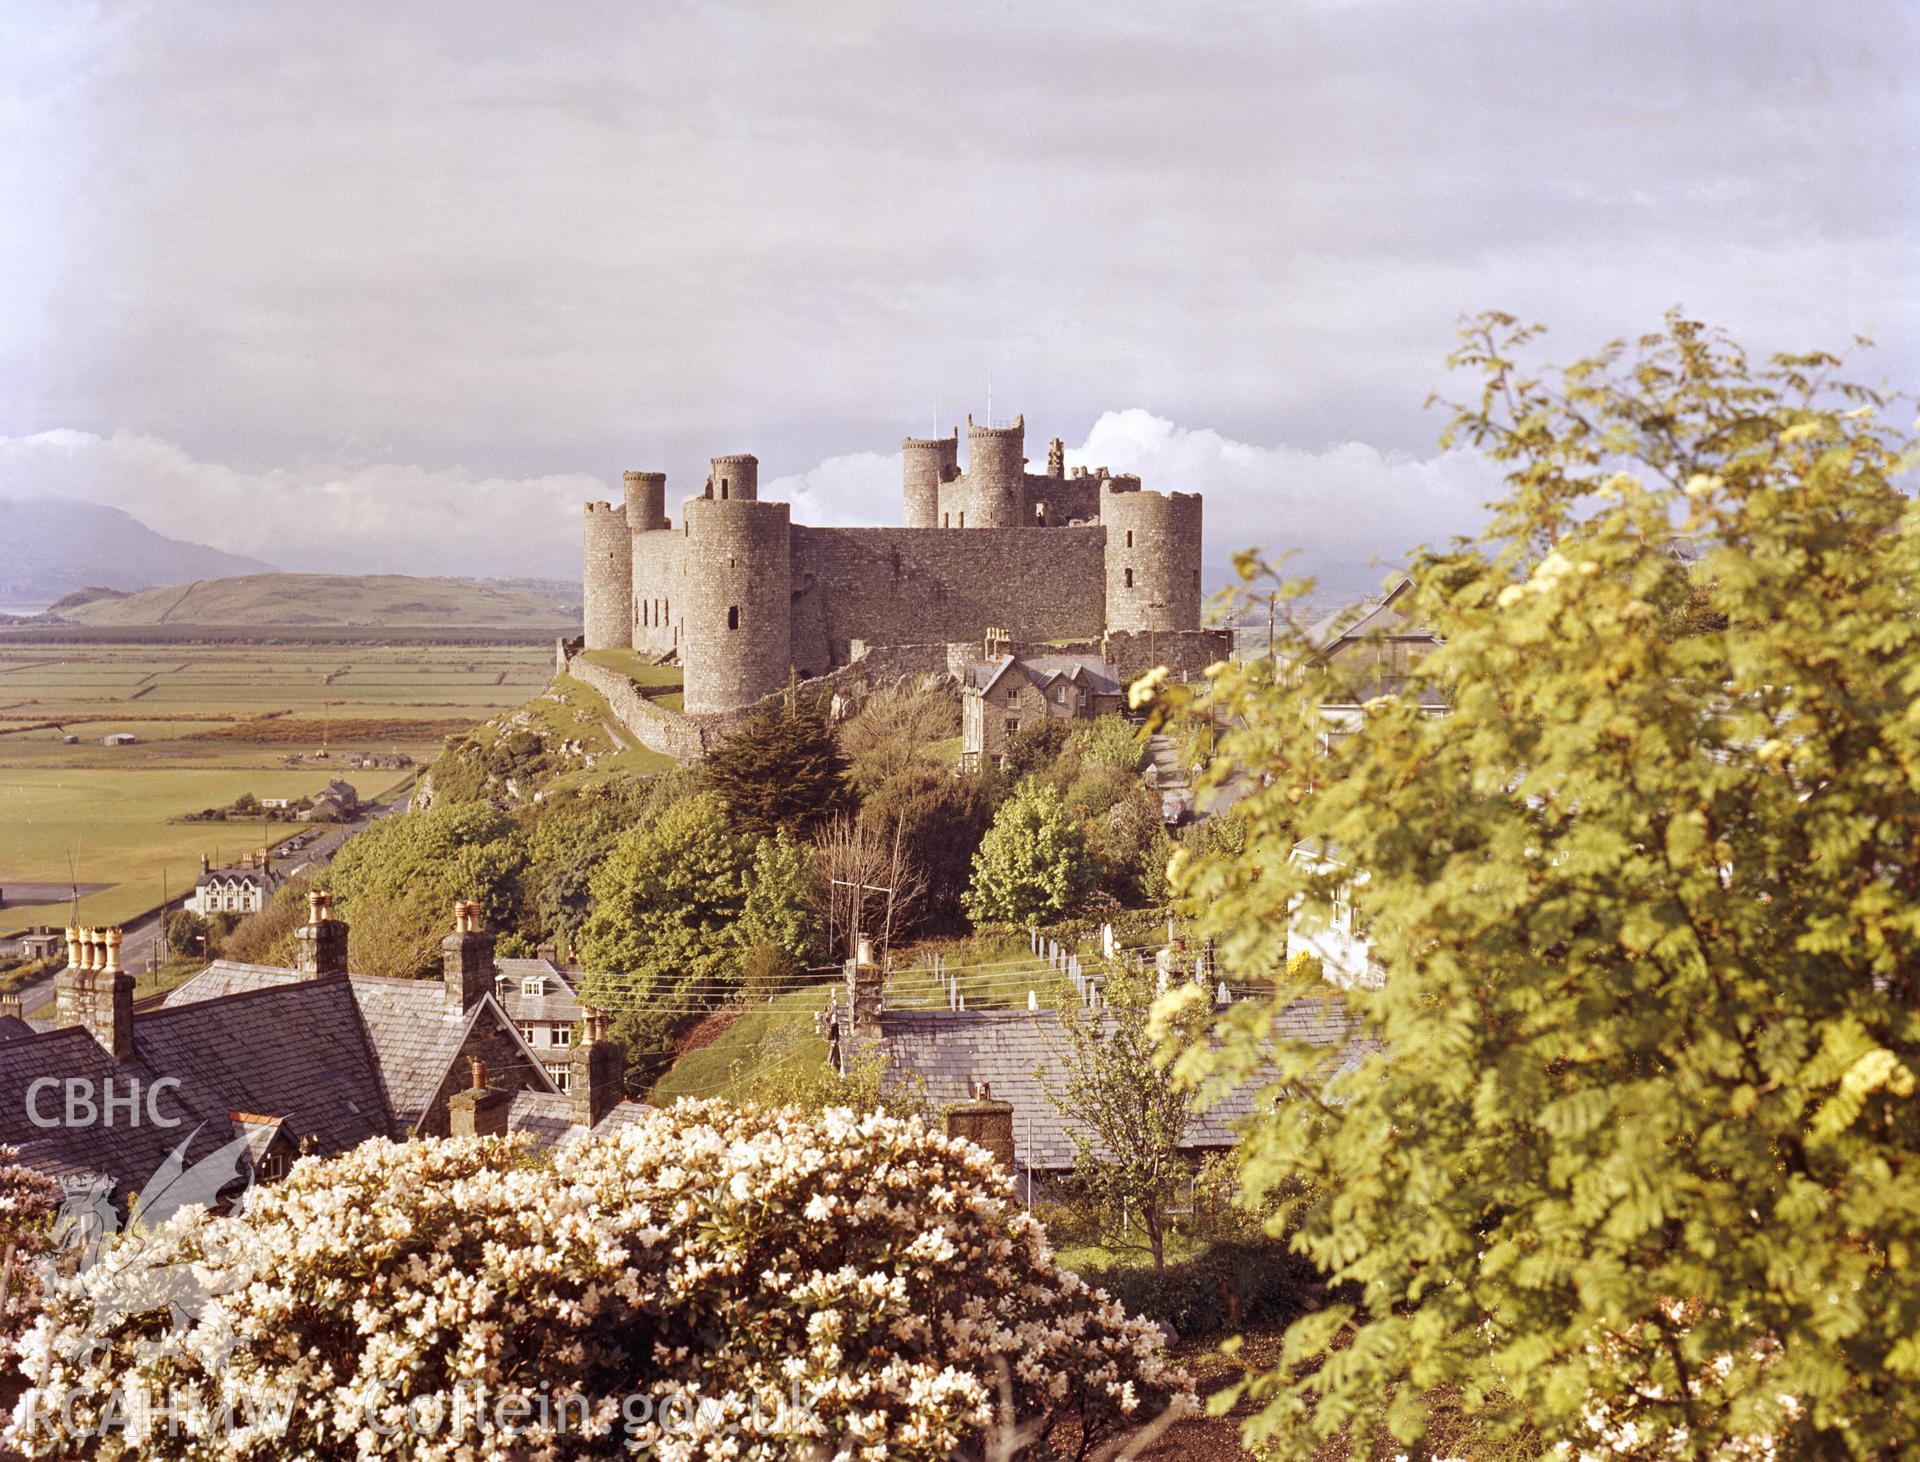 1 b/w print showing view of Harlech castle, collated by the former Central Office of Information.